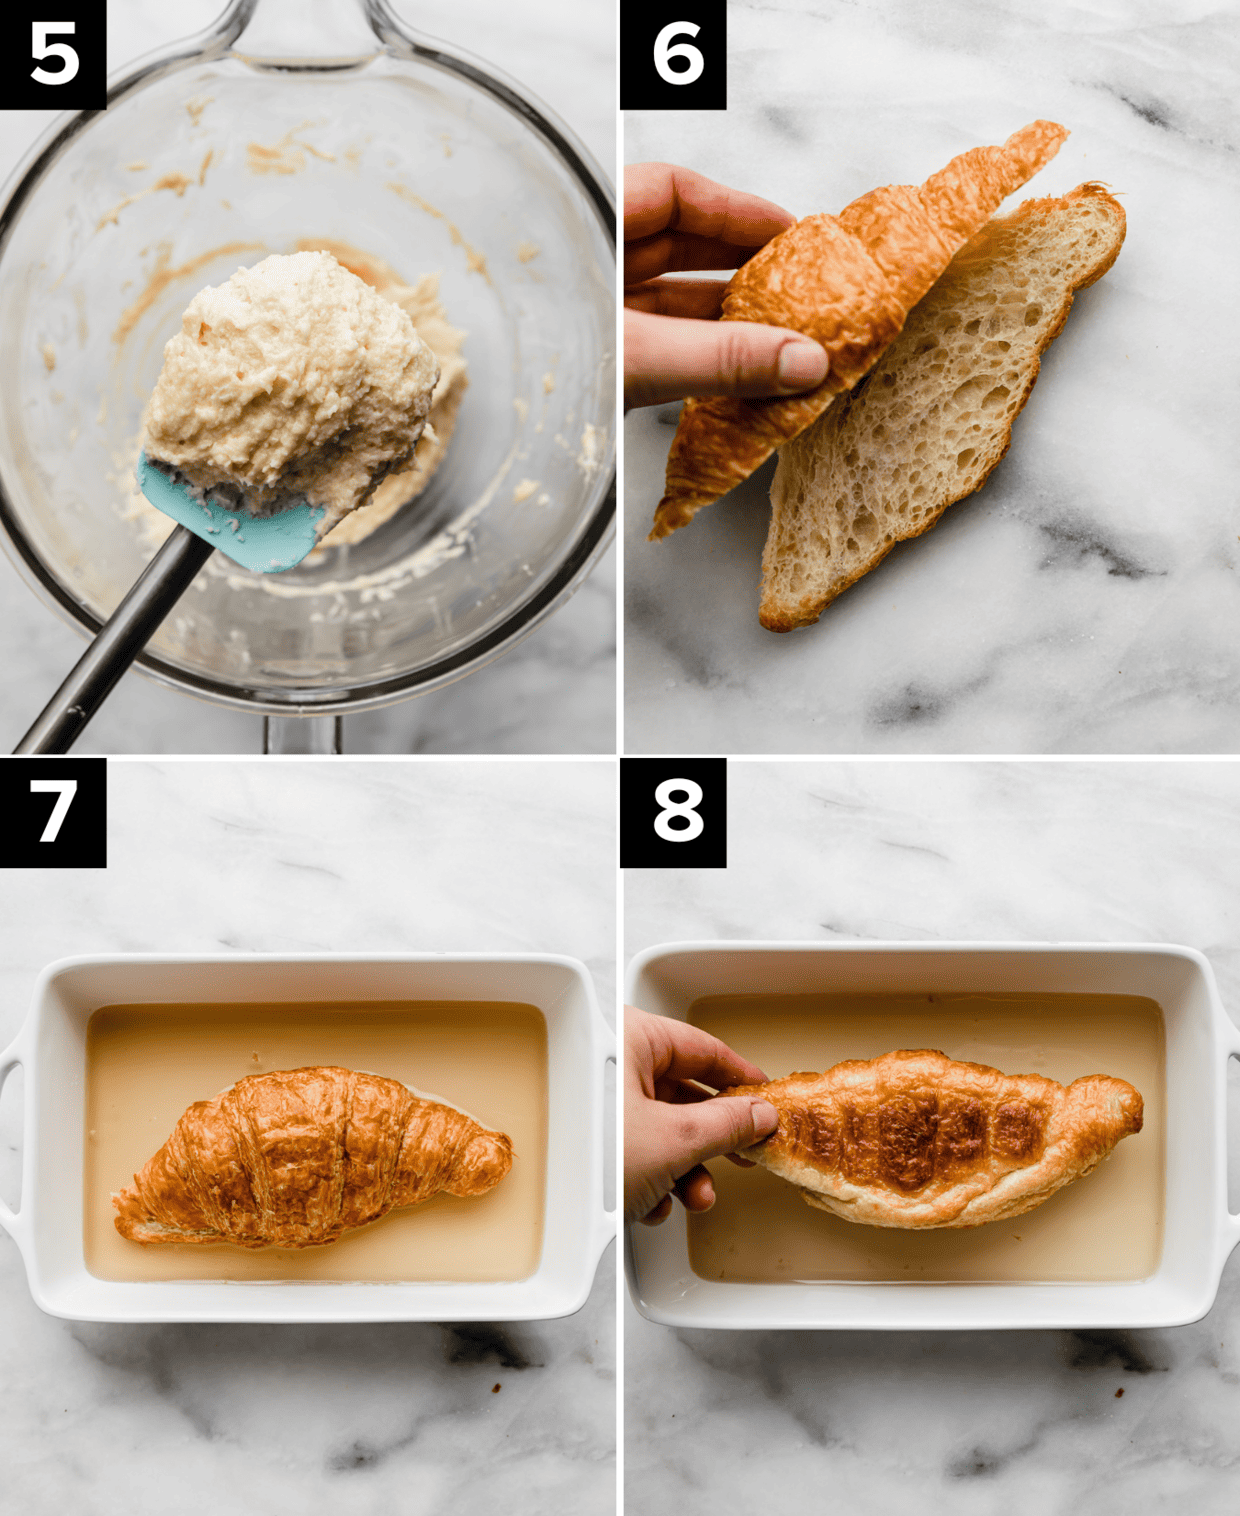 Four images, top left image is creamed light yellow mixture on a blue spatula, top right image is a croissant cut horizontally, bottom two images is a croissant being dipped in a simple syrup that's in a rectangular dish.